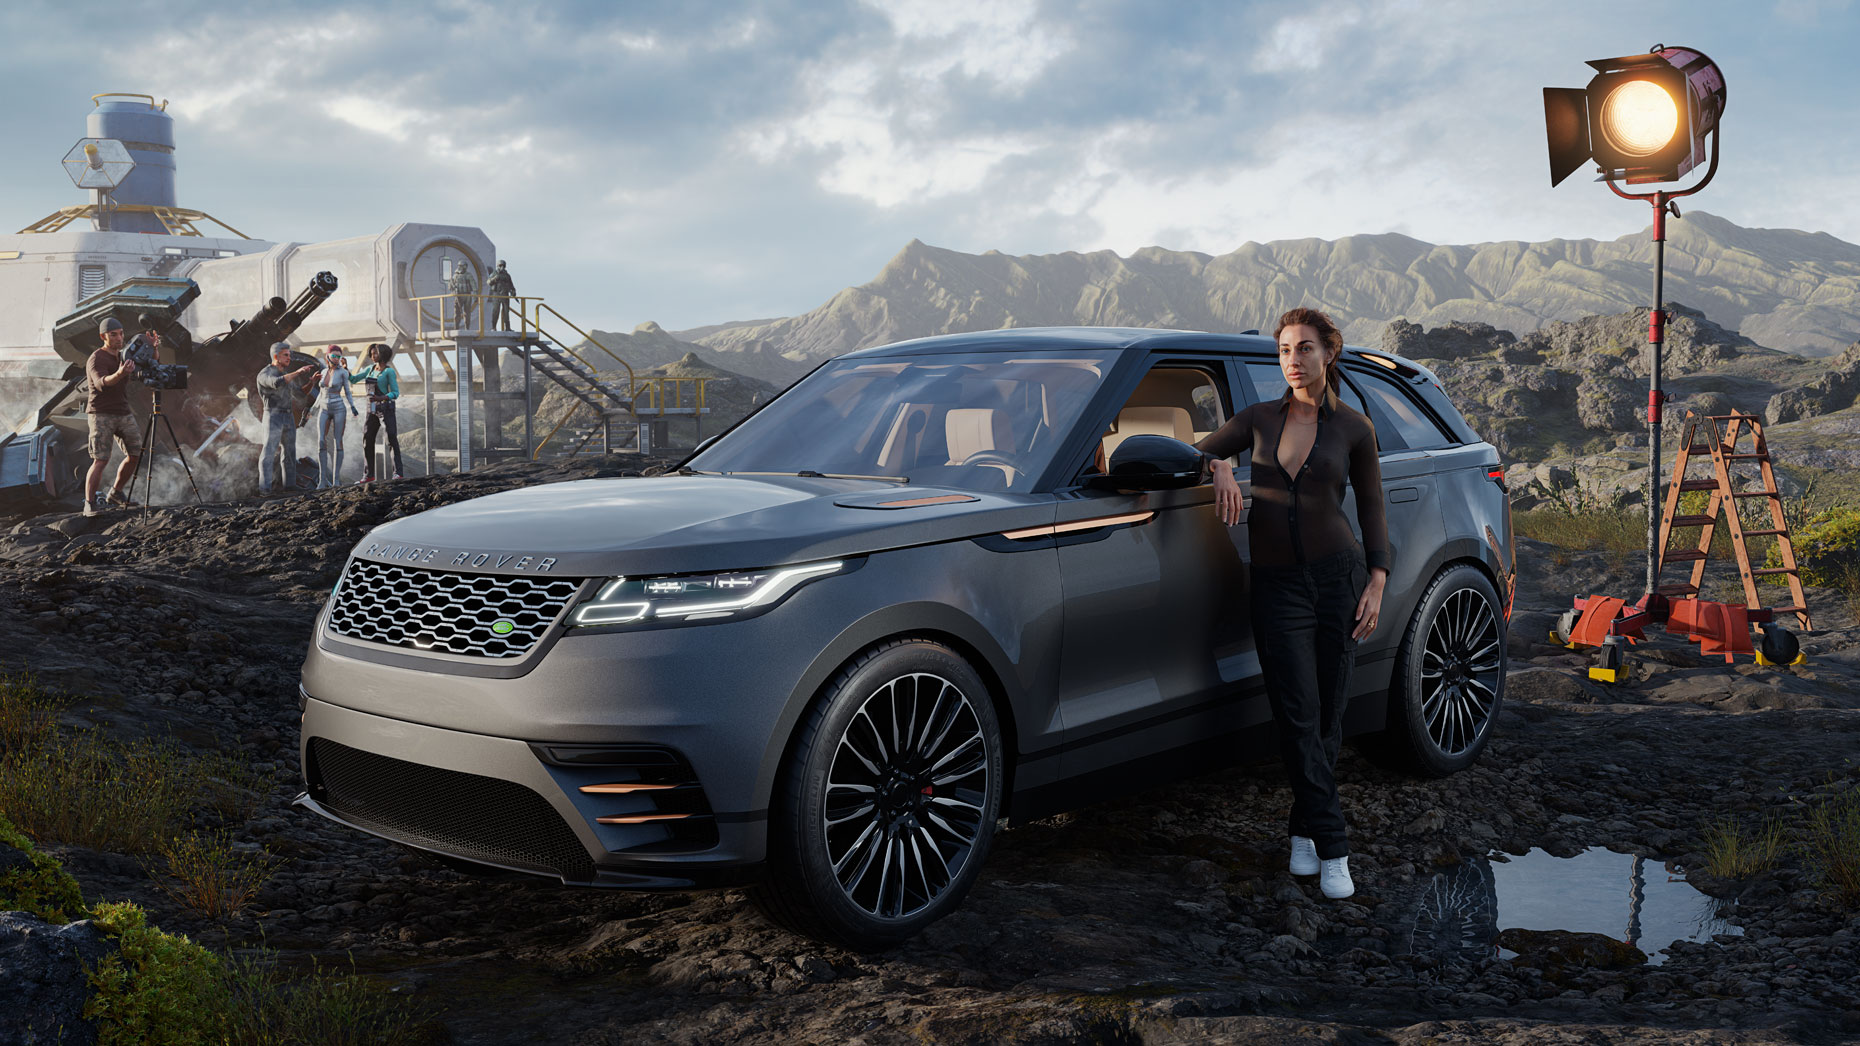 Portrait of female and Range Rover by Dale May (100% CGI)